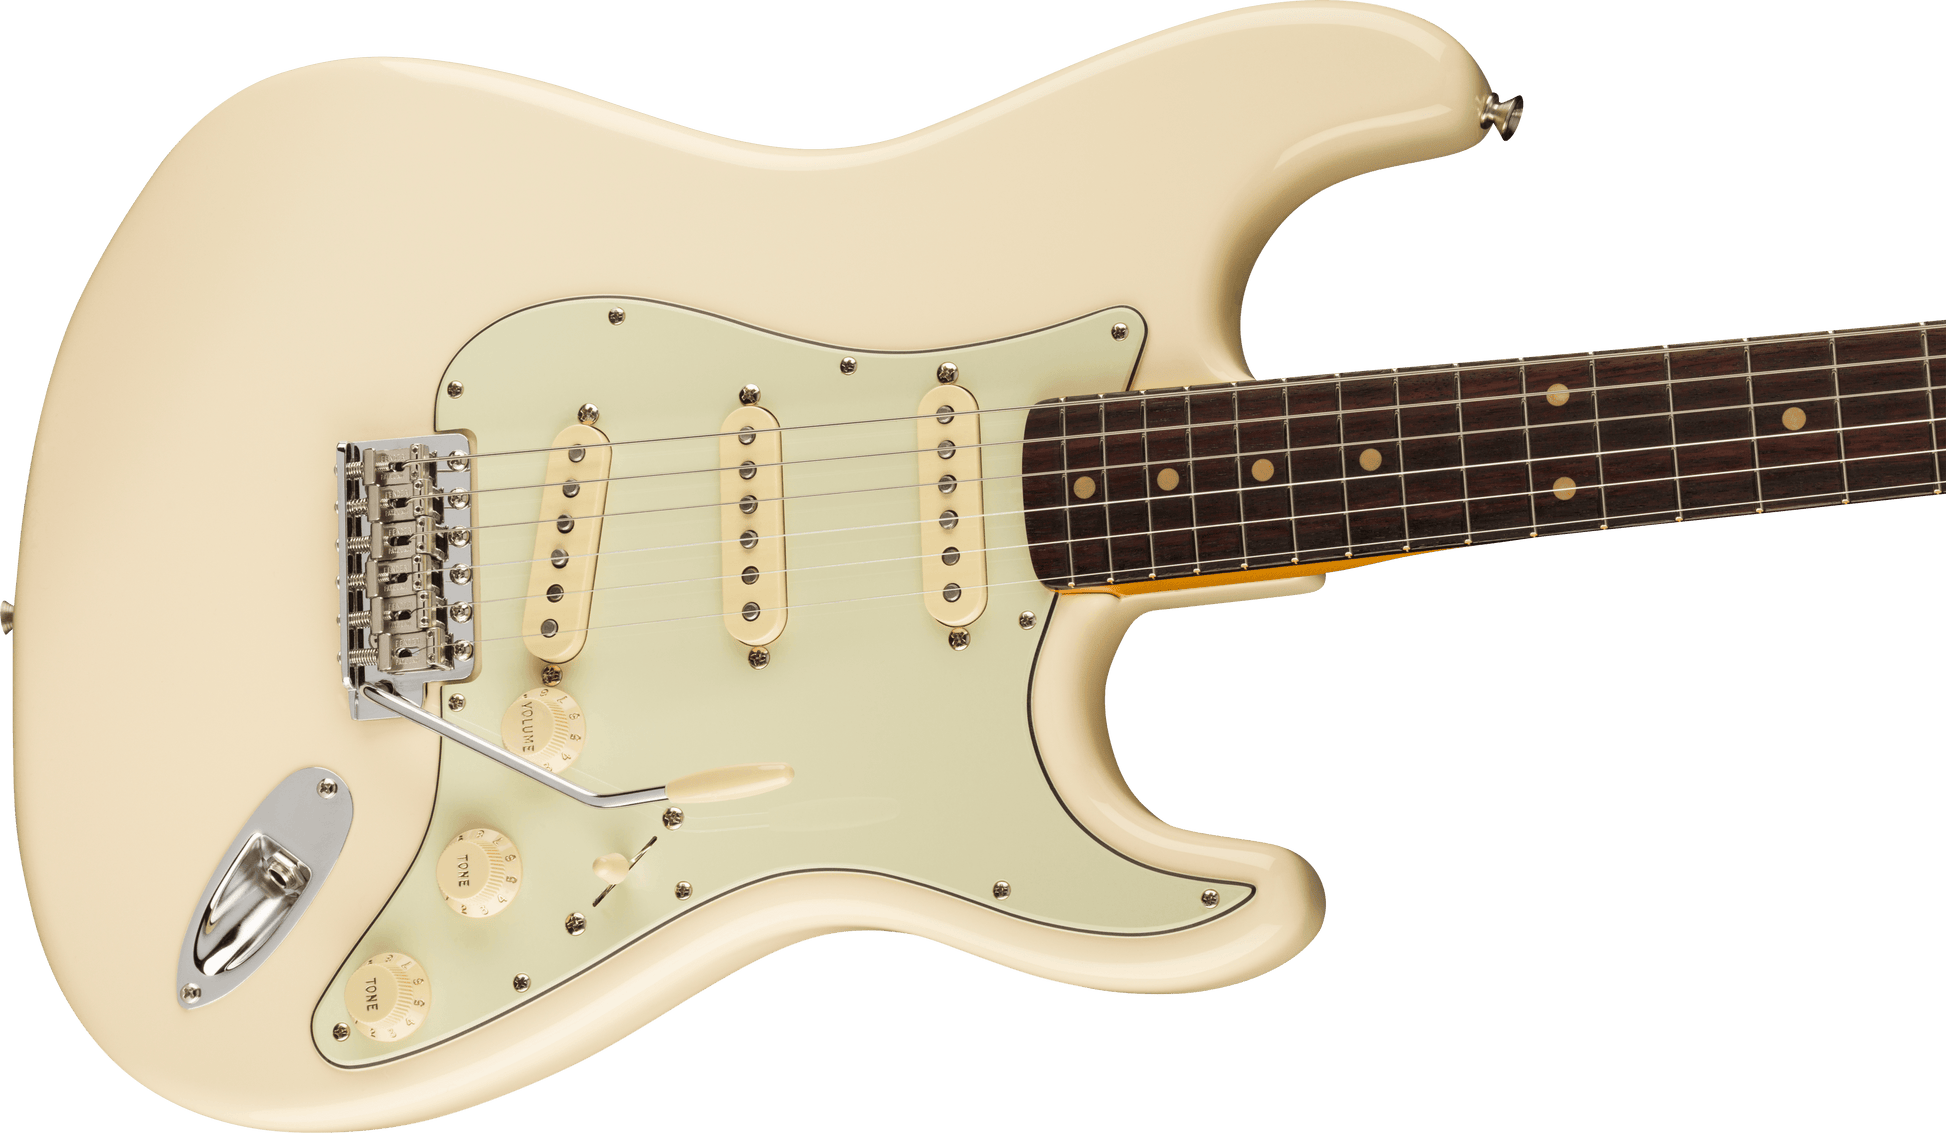 Fender American Vintage II 1961 Stratocaster Electric Guitar - Rw - Olympic White - Joondalup Music Centre